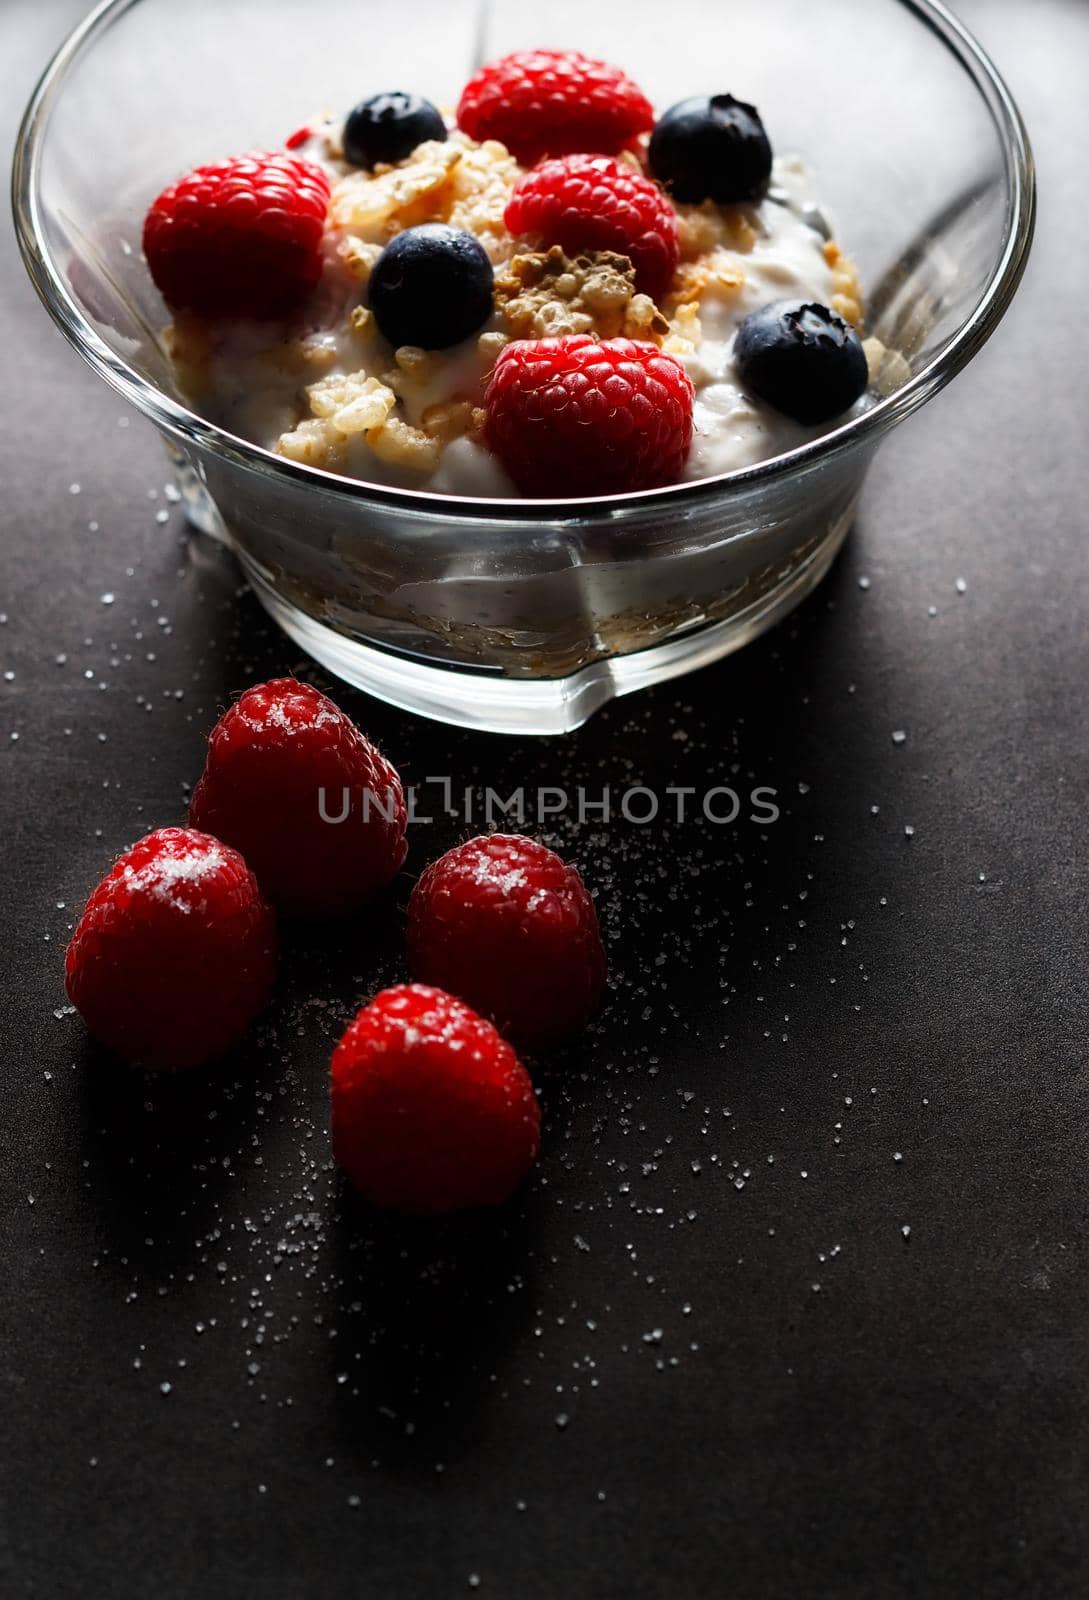 Raspberries, blueberries, cereals and yogurt in a glass bowl on a black surface. Healthy breakfast for a healthy life. Vertical image.